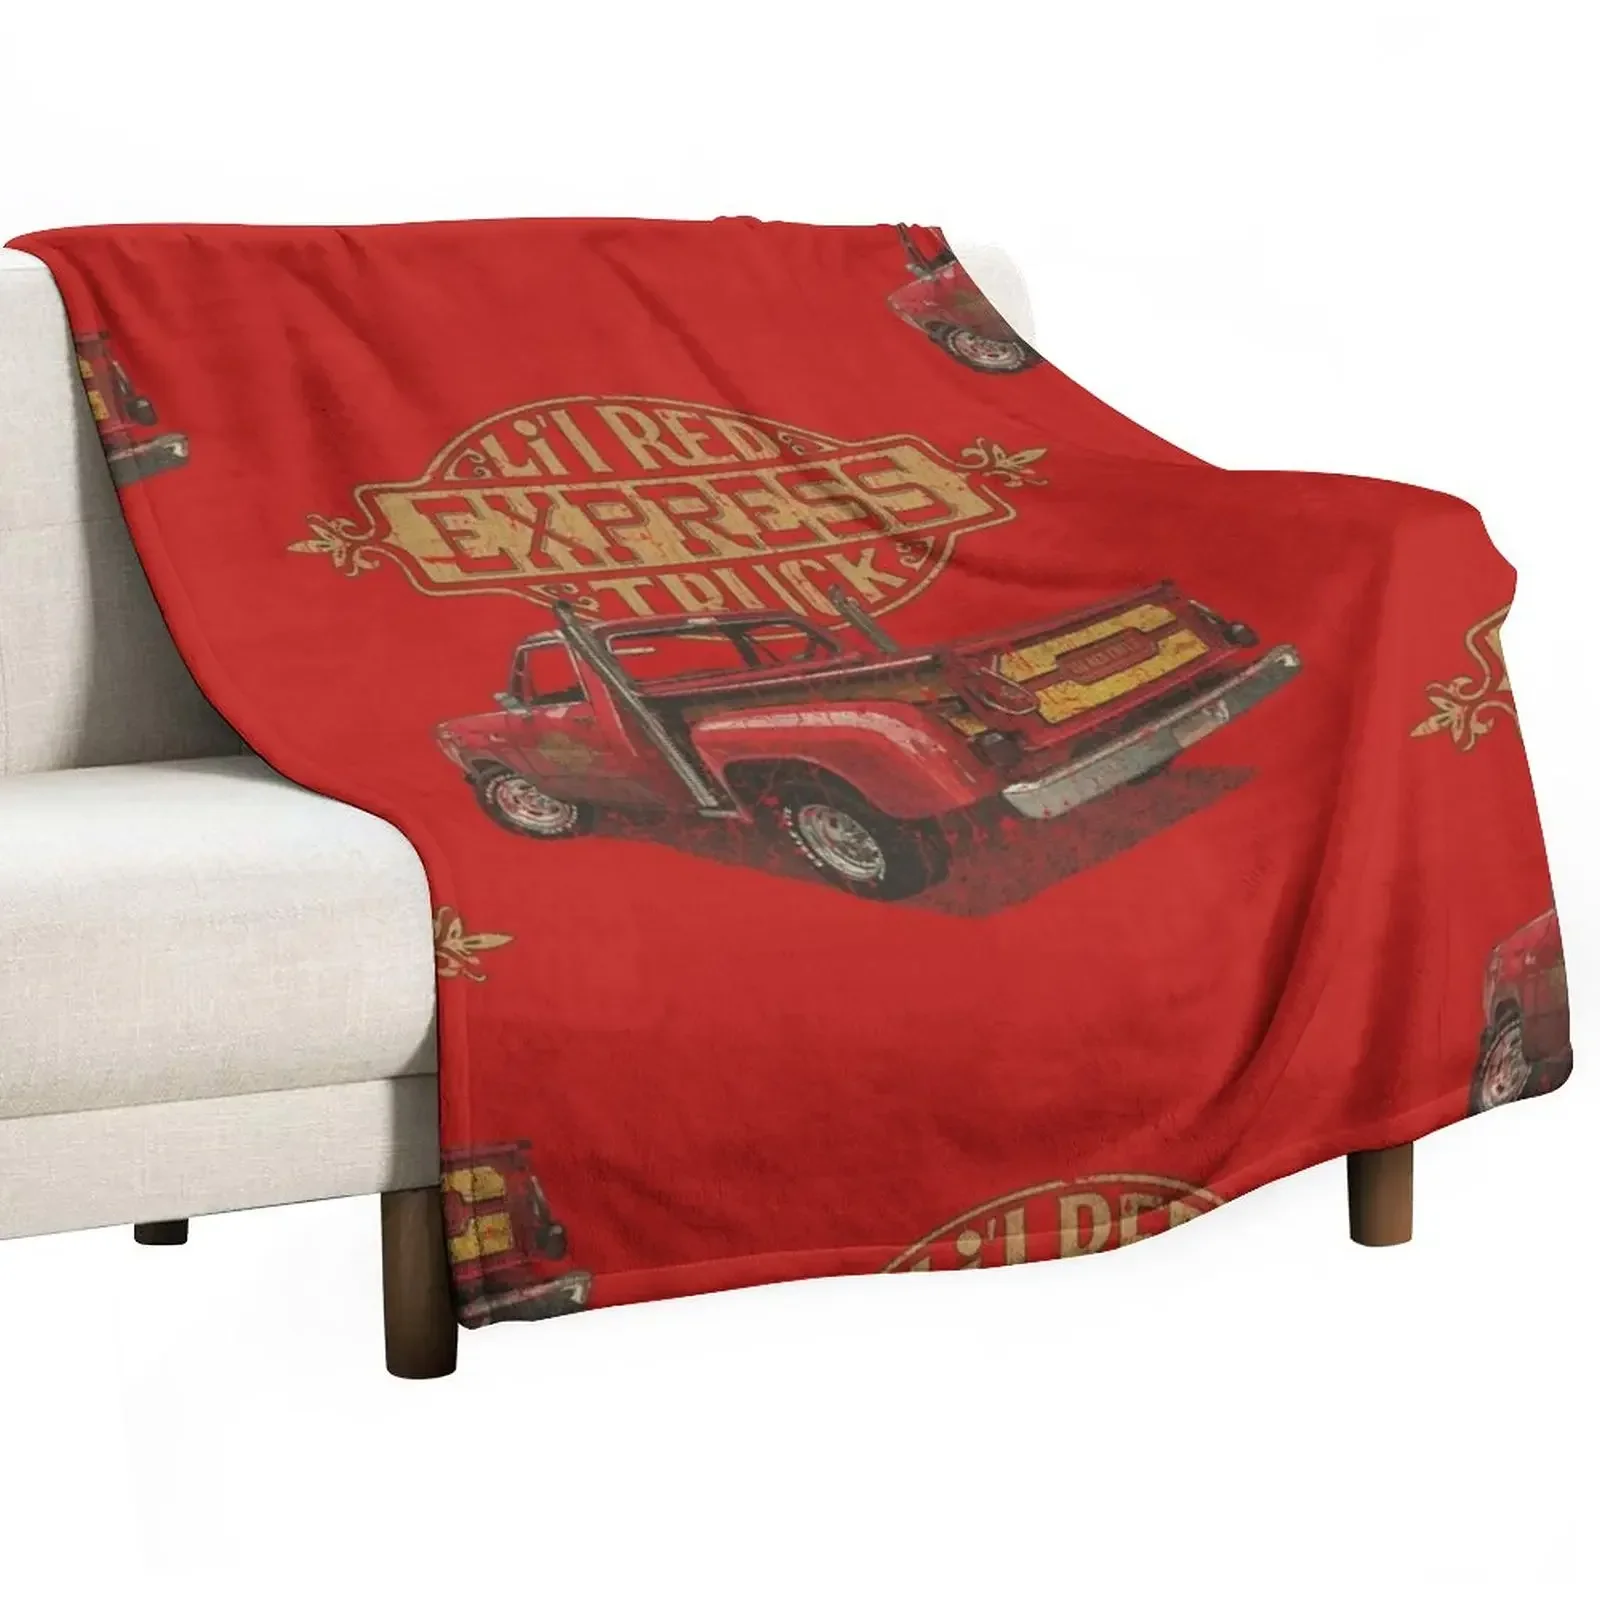 

Lil' Red Express 1978 Throw Blanket Soft Big Sofa Quilt Summer for sofa Blankets